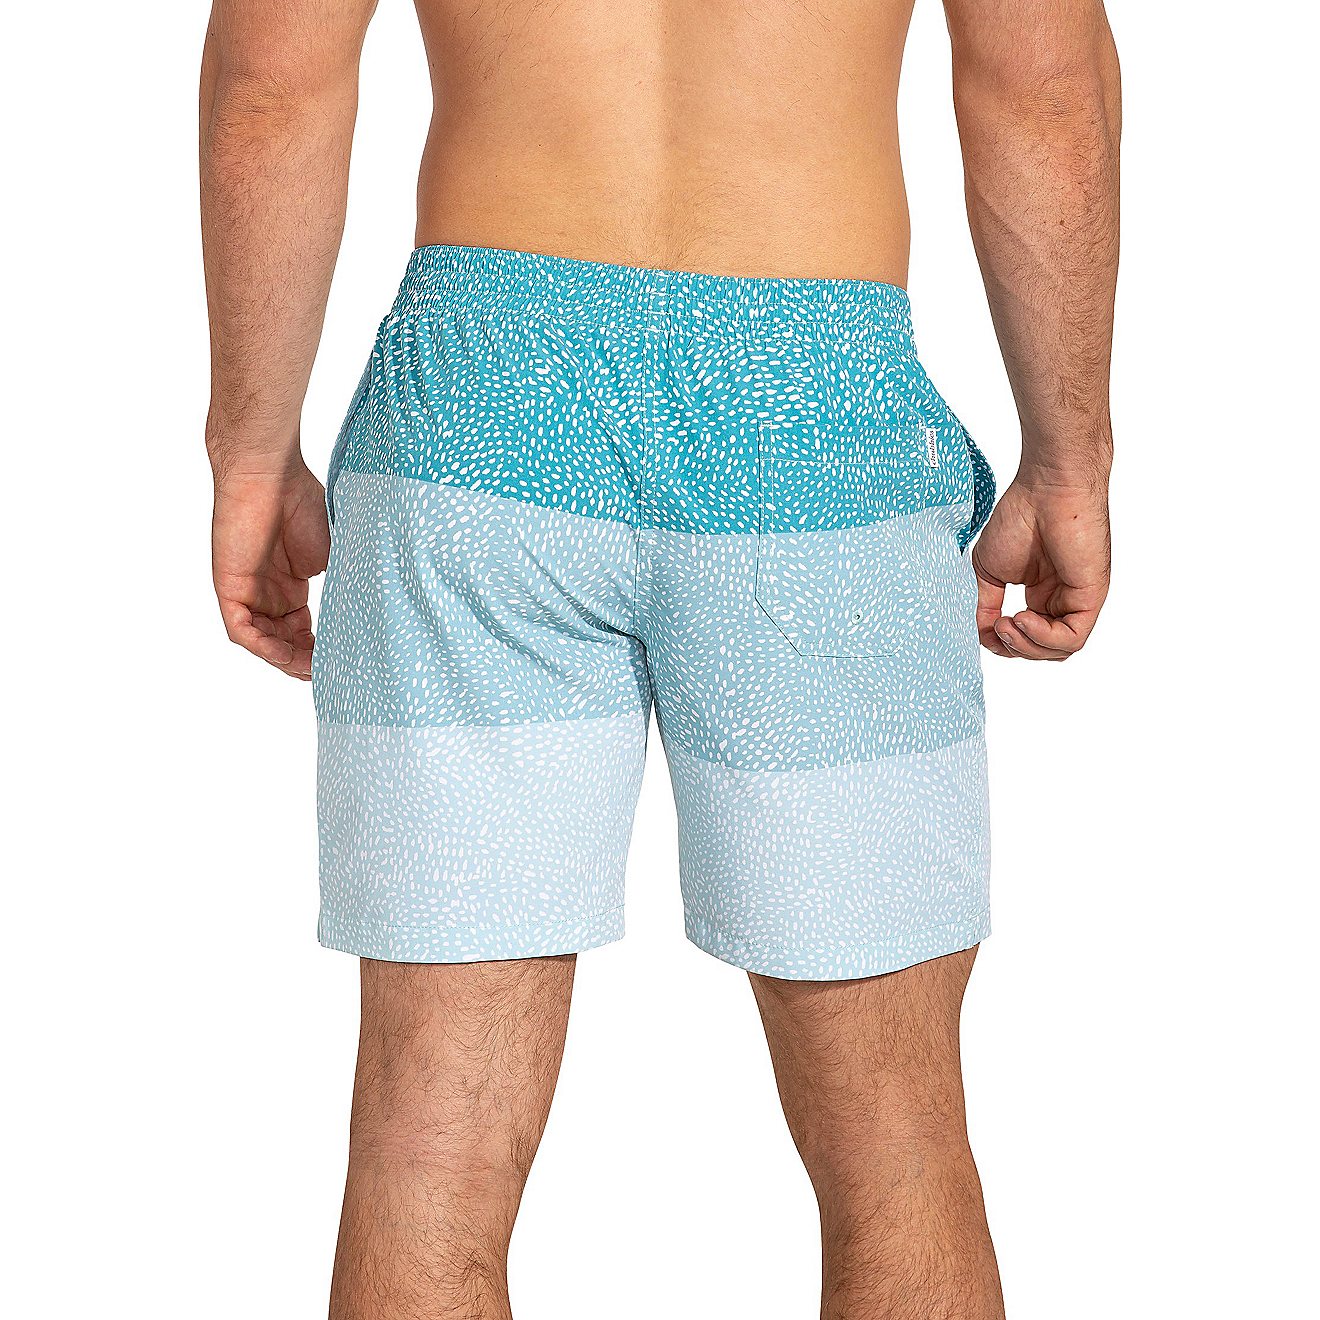 Chubbies Men's Whale Sharks Stretch Swim Trunks 7 in                                                                             - view number 2